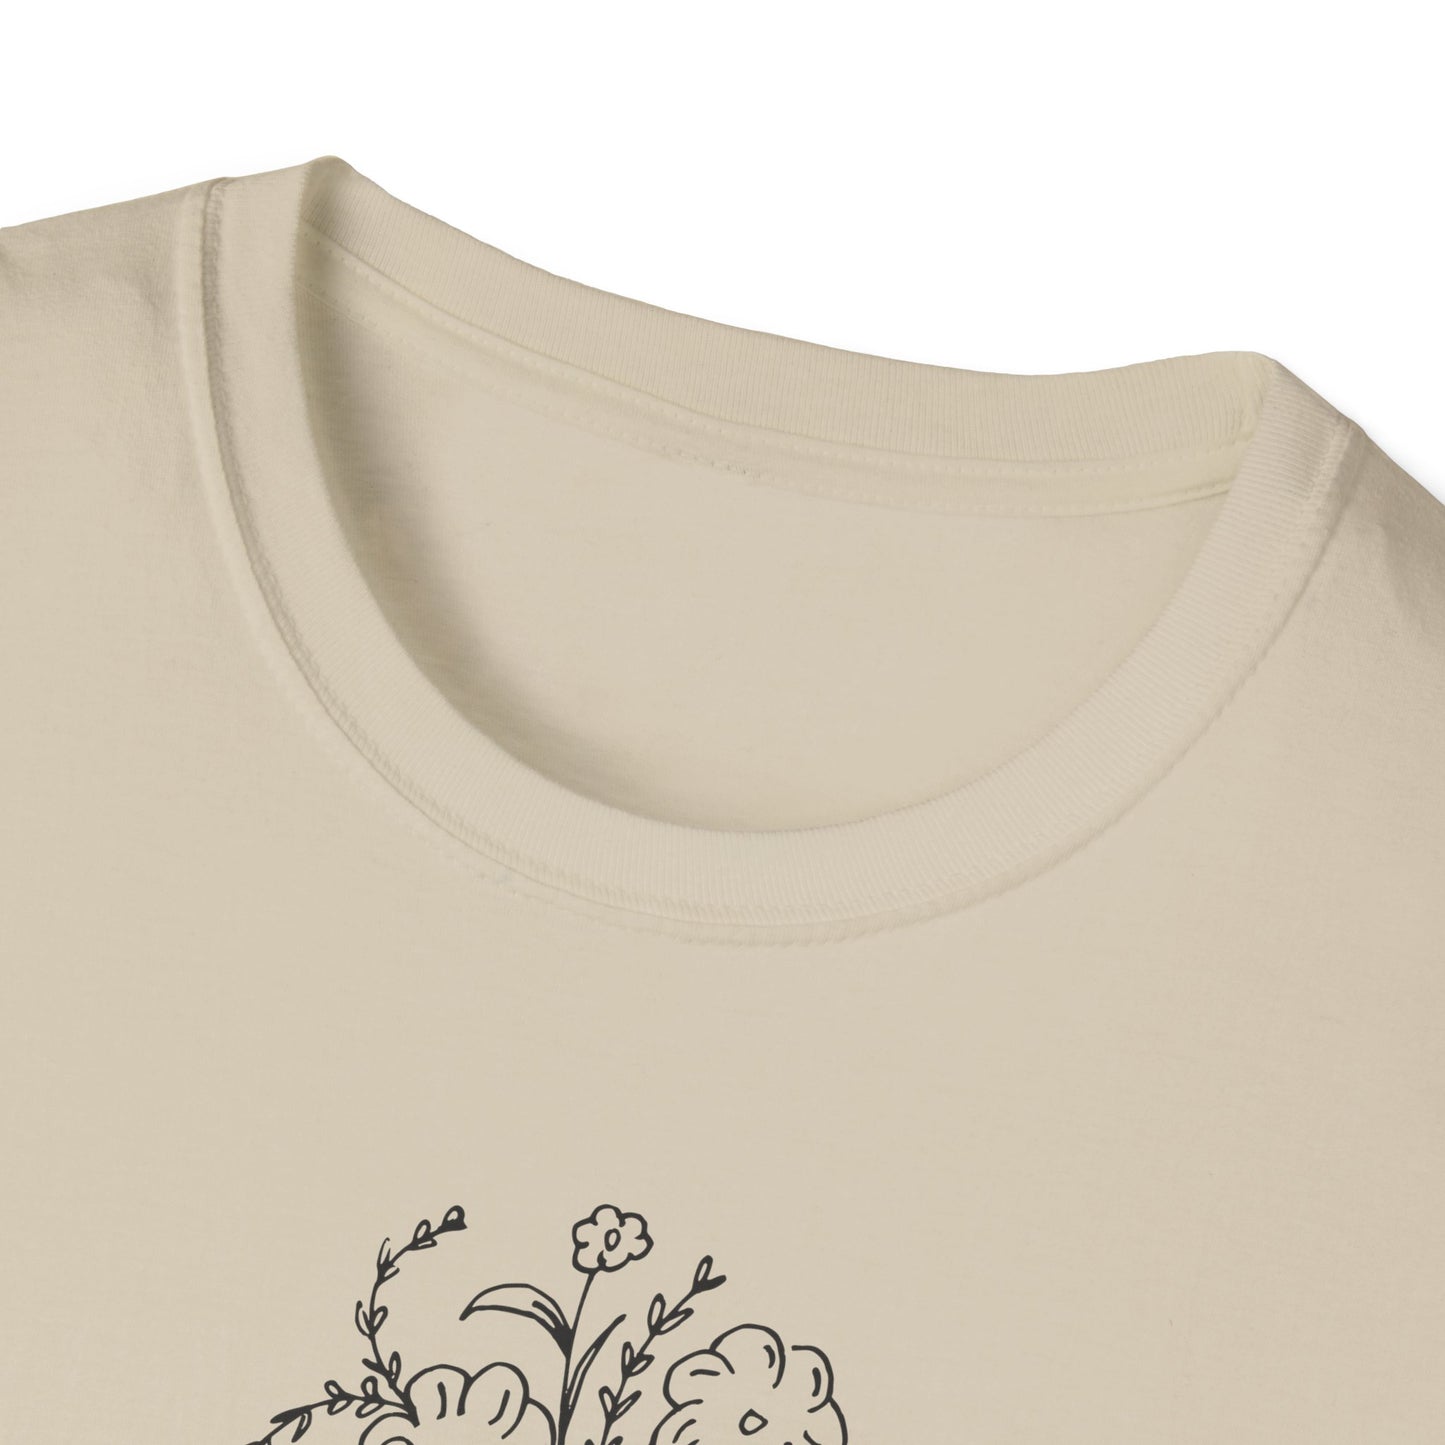 Blooming Thoughts - Unisex Softstyle T-Shirt